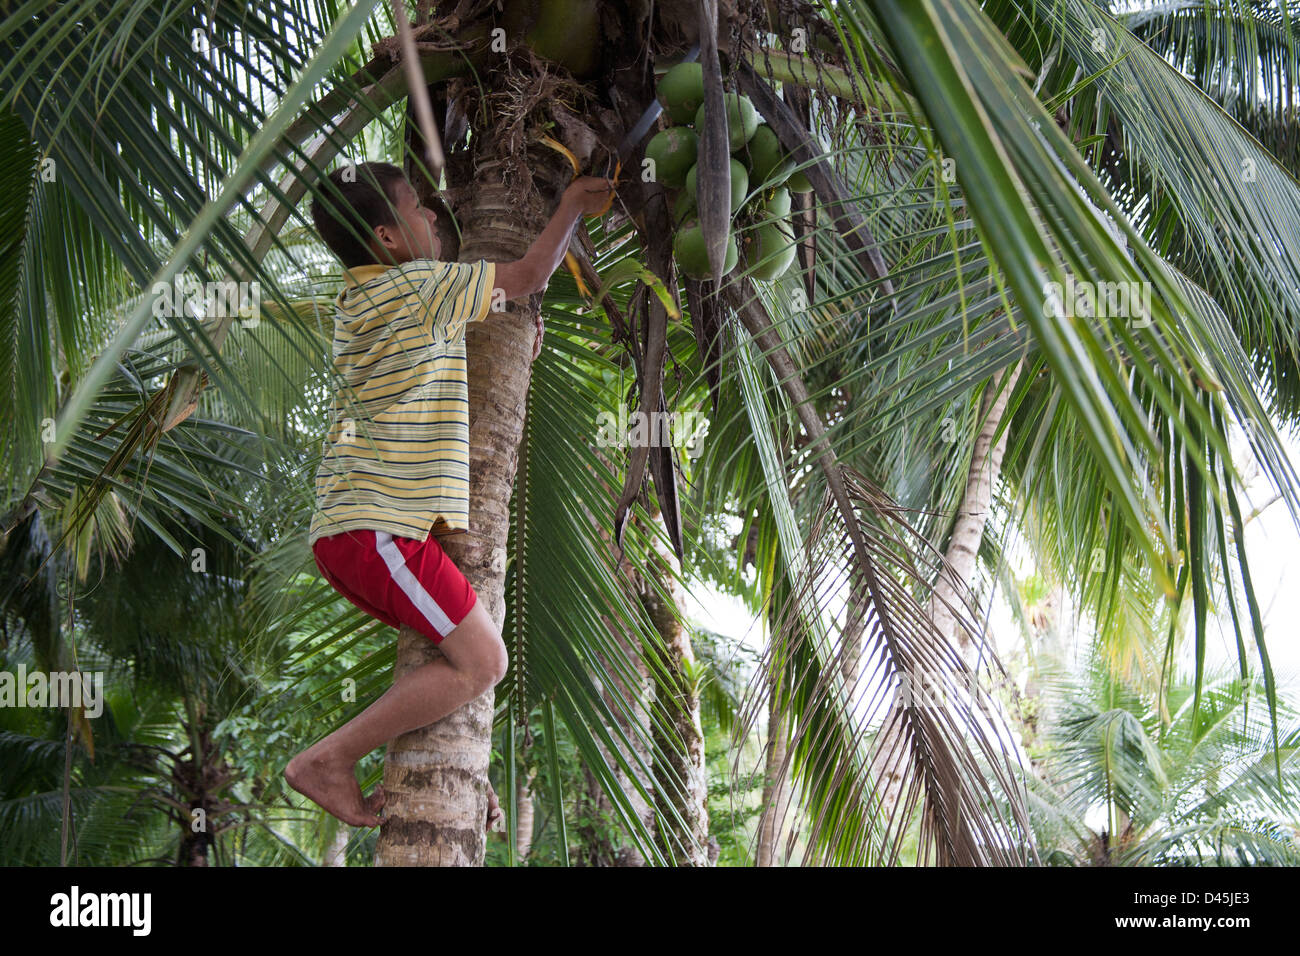 A young Panamanian boy climbing a coconut palm tree to grab the fruit. Stock Photo